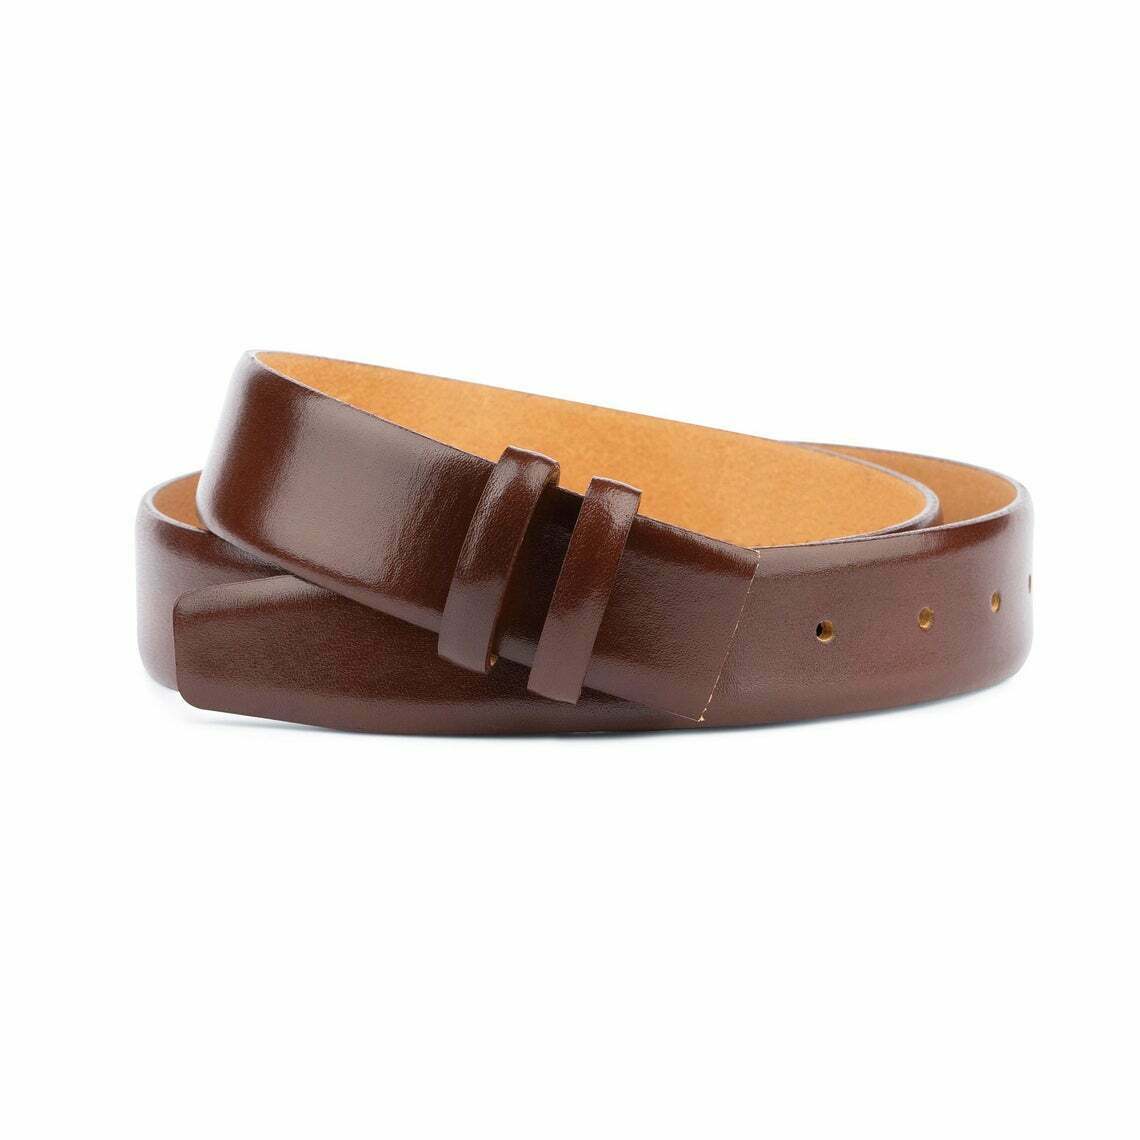 Cognac Leather Belt Replacement Strap For Montblanc Buckle Mens Brown Belts 35mm